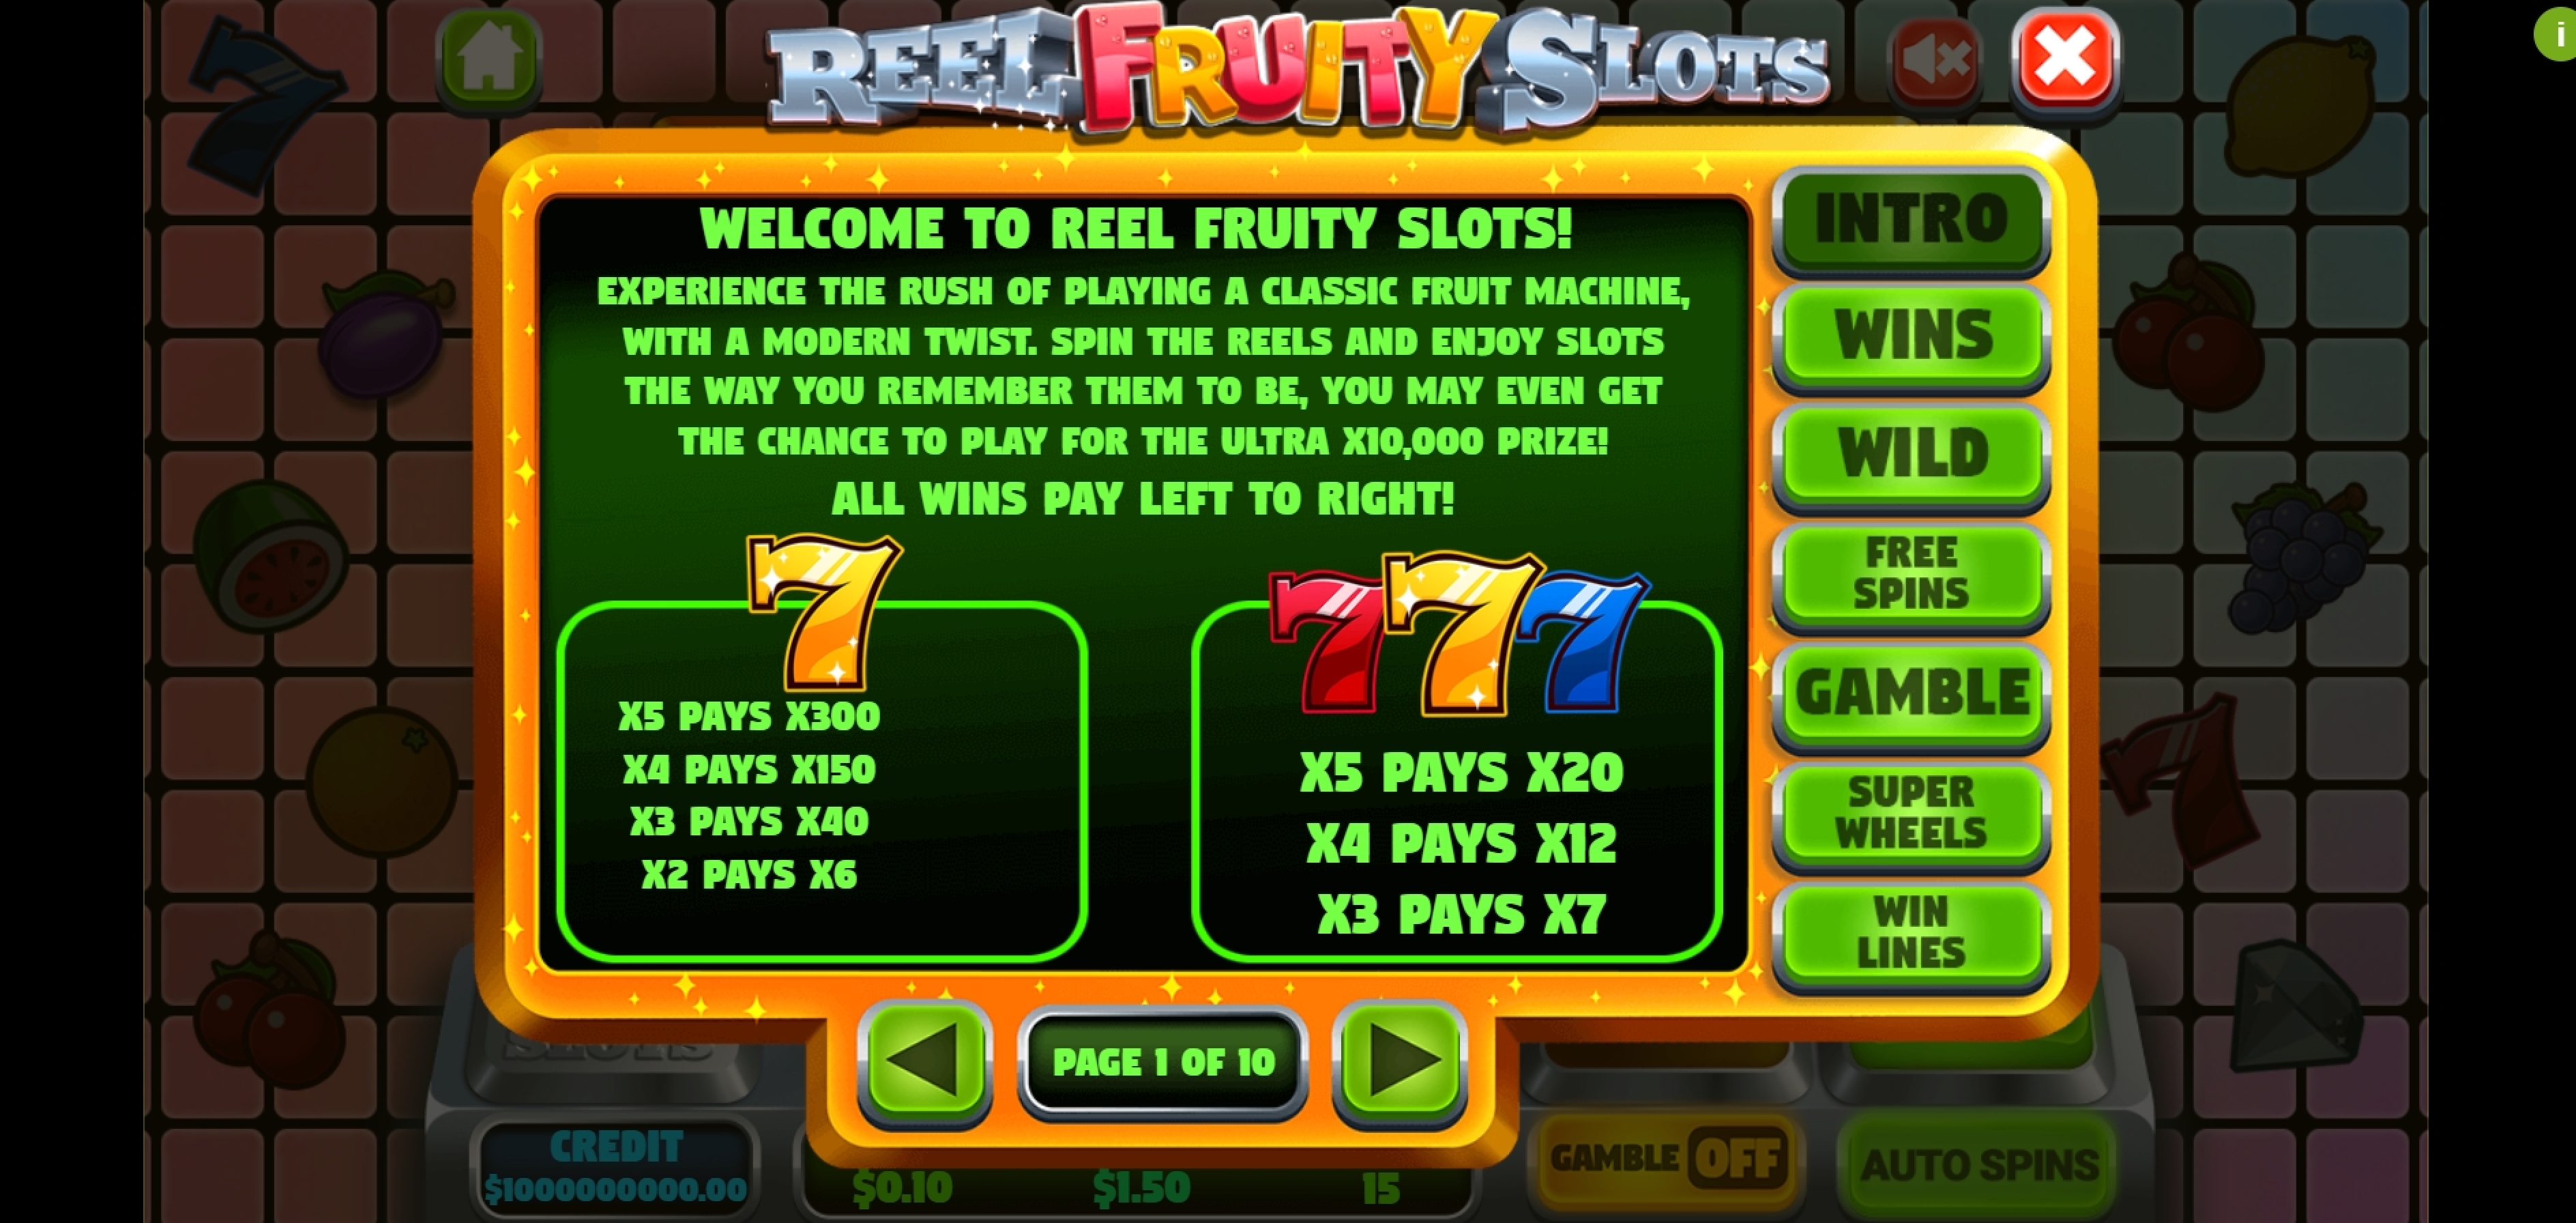 Info of Reel Fruity Slots Slot Game by Slot Factory